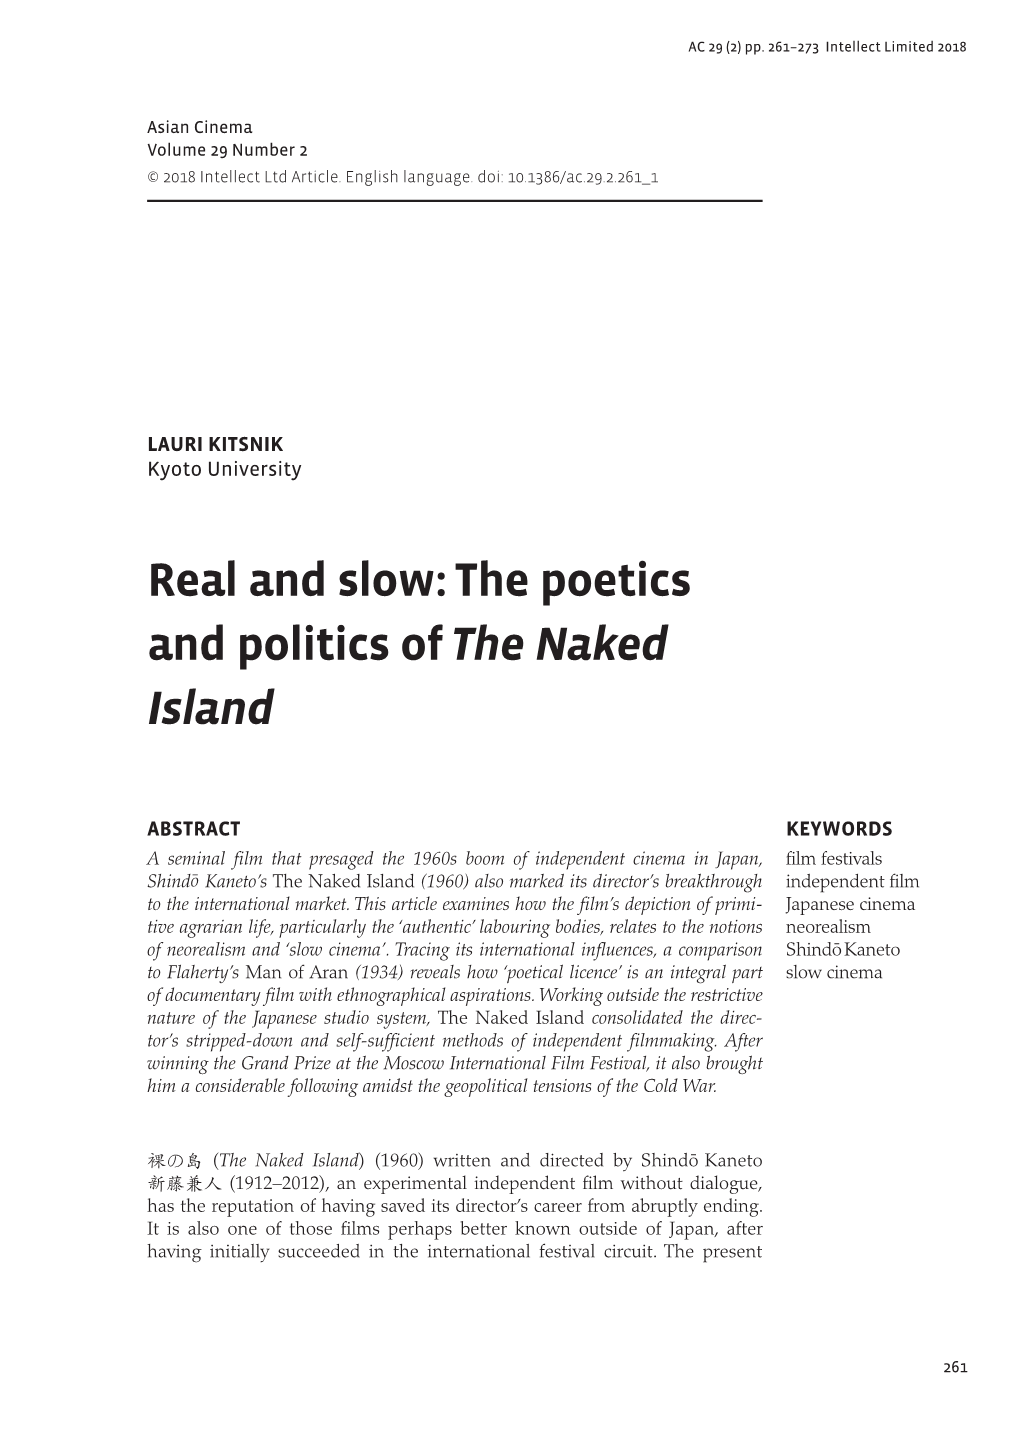 The Poetics and Politics of the Naked Island